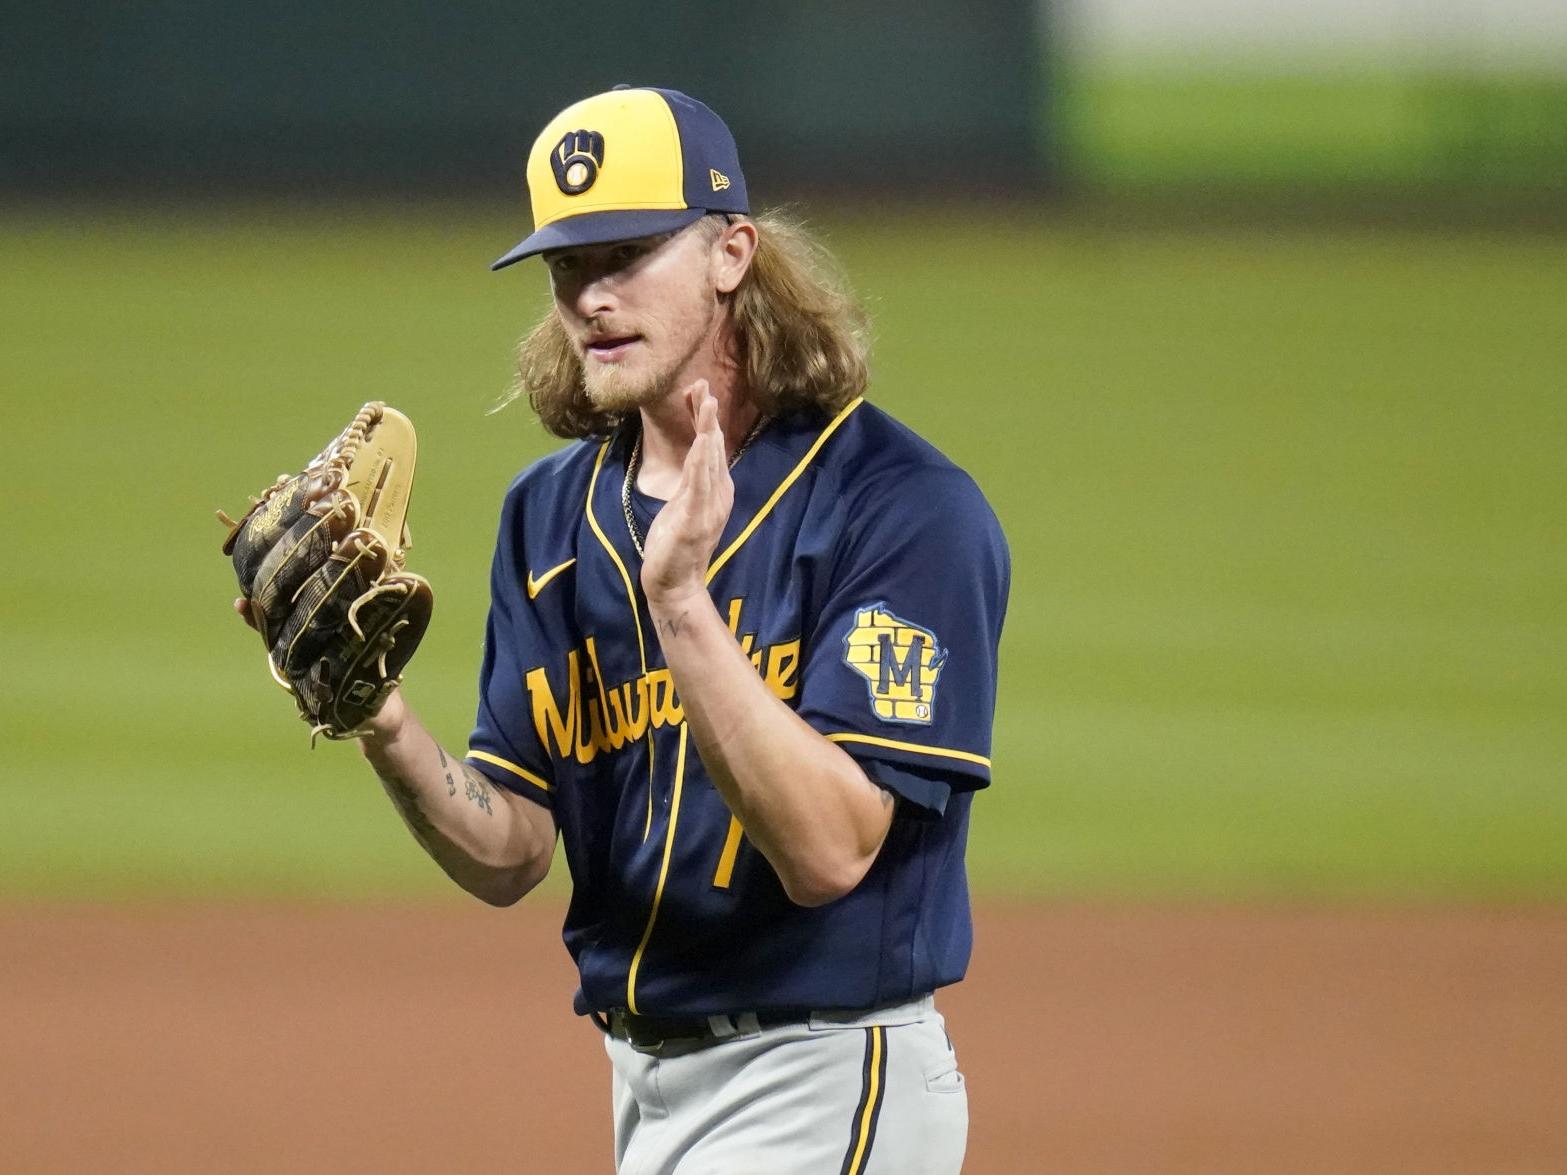 Brewers closer Josh Hader works to expand his repertoire | Major League Baseball | madison.com